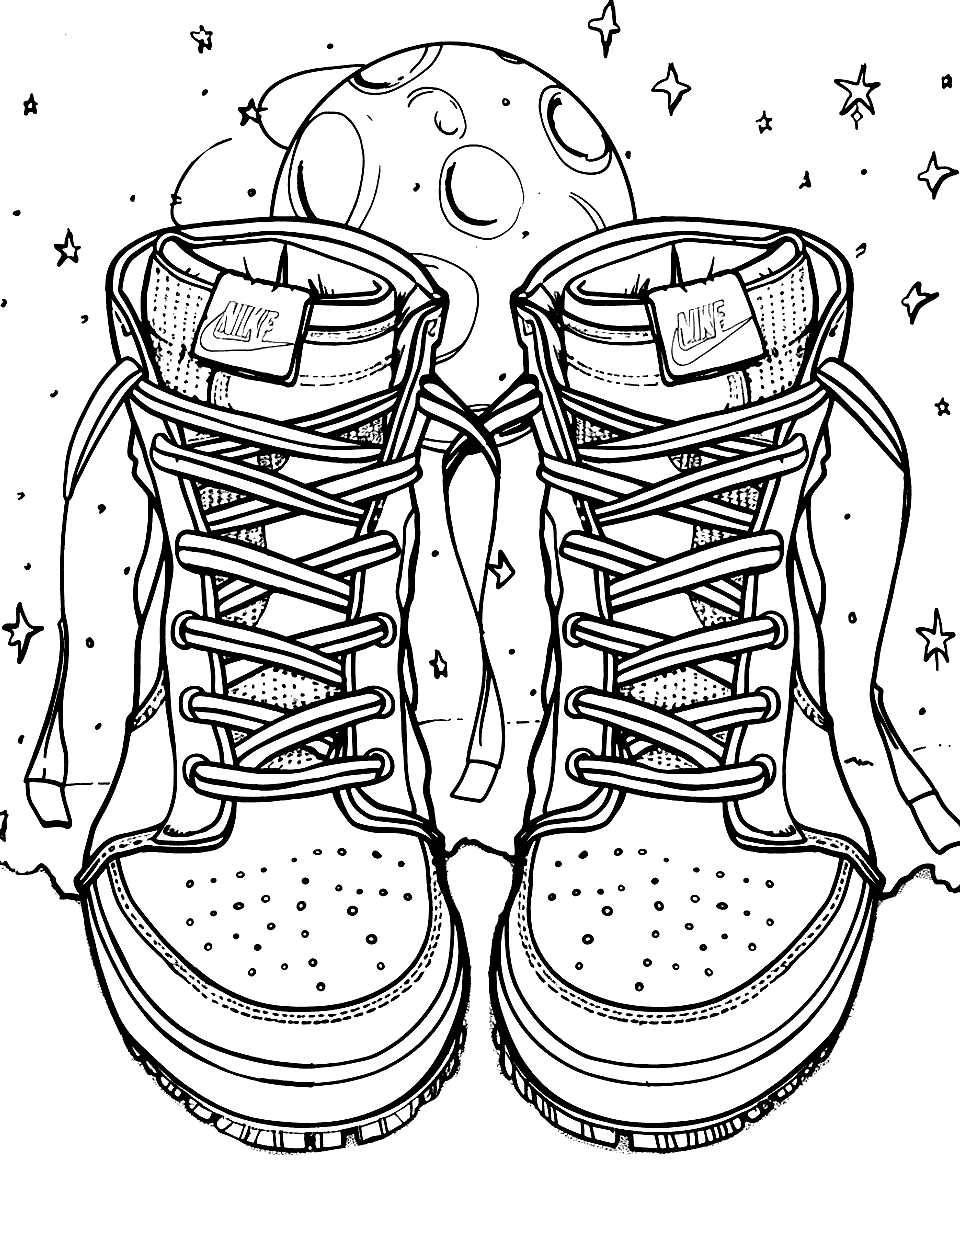 Nike in Space Shoe Coloring Page - Nike Shoes with stars and a distant planet in the backdrop.